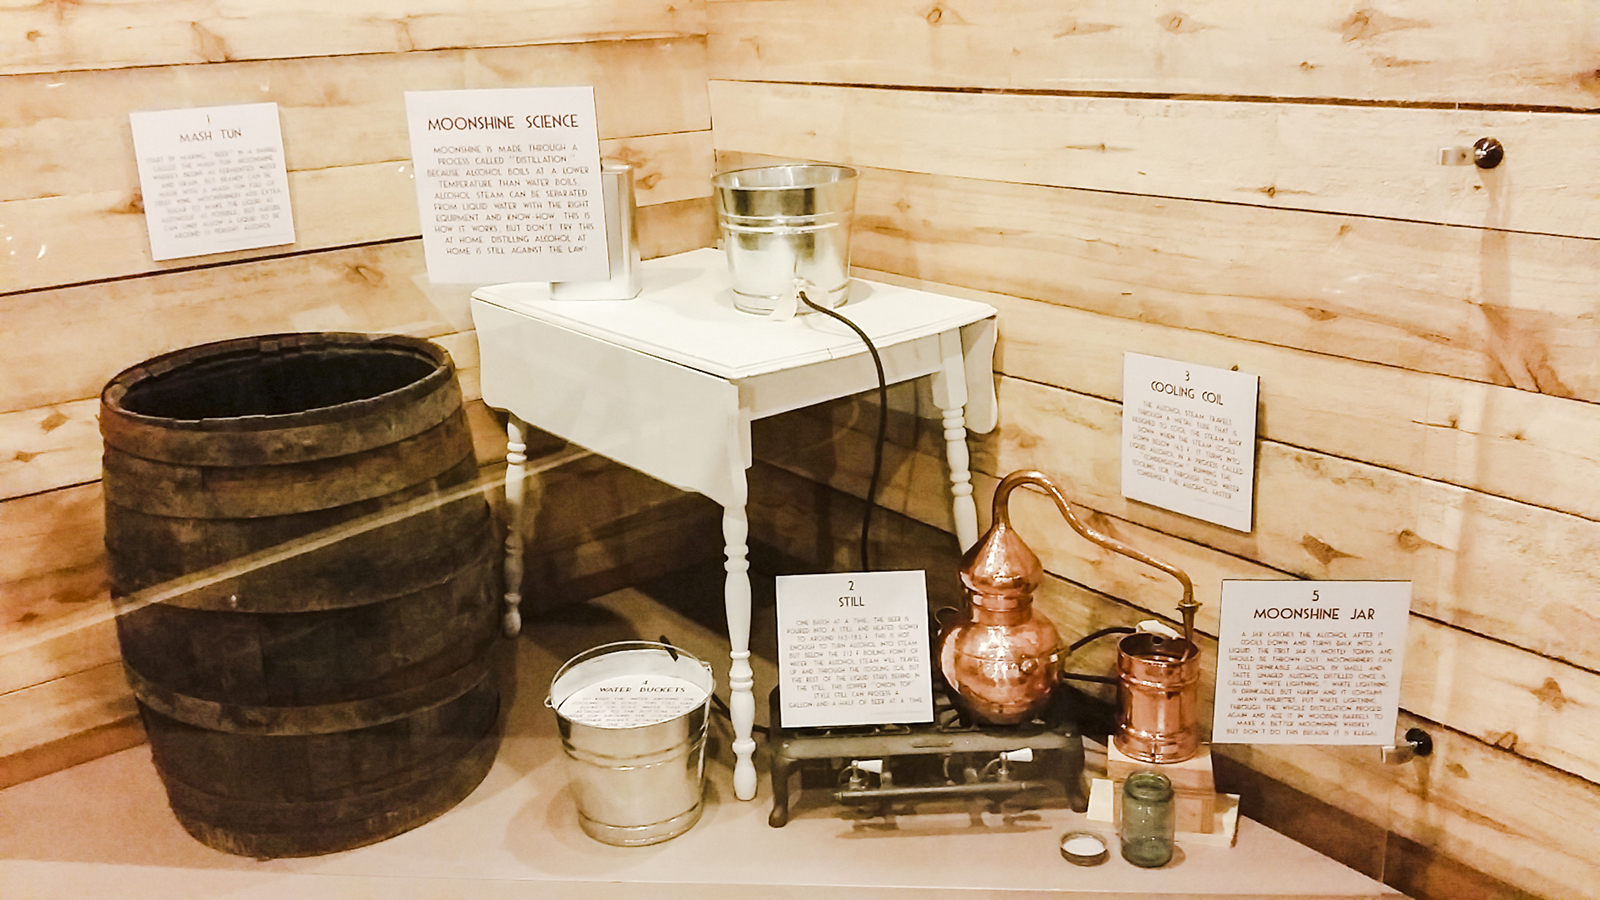 Tools to make Moonshine at an exhibition on the Prohibition in the USA.